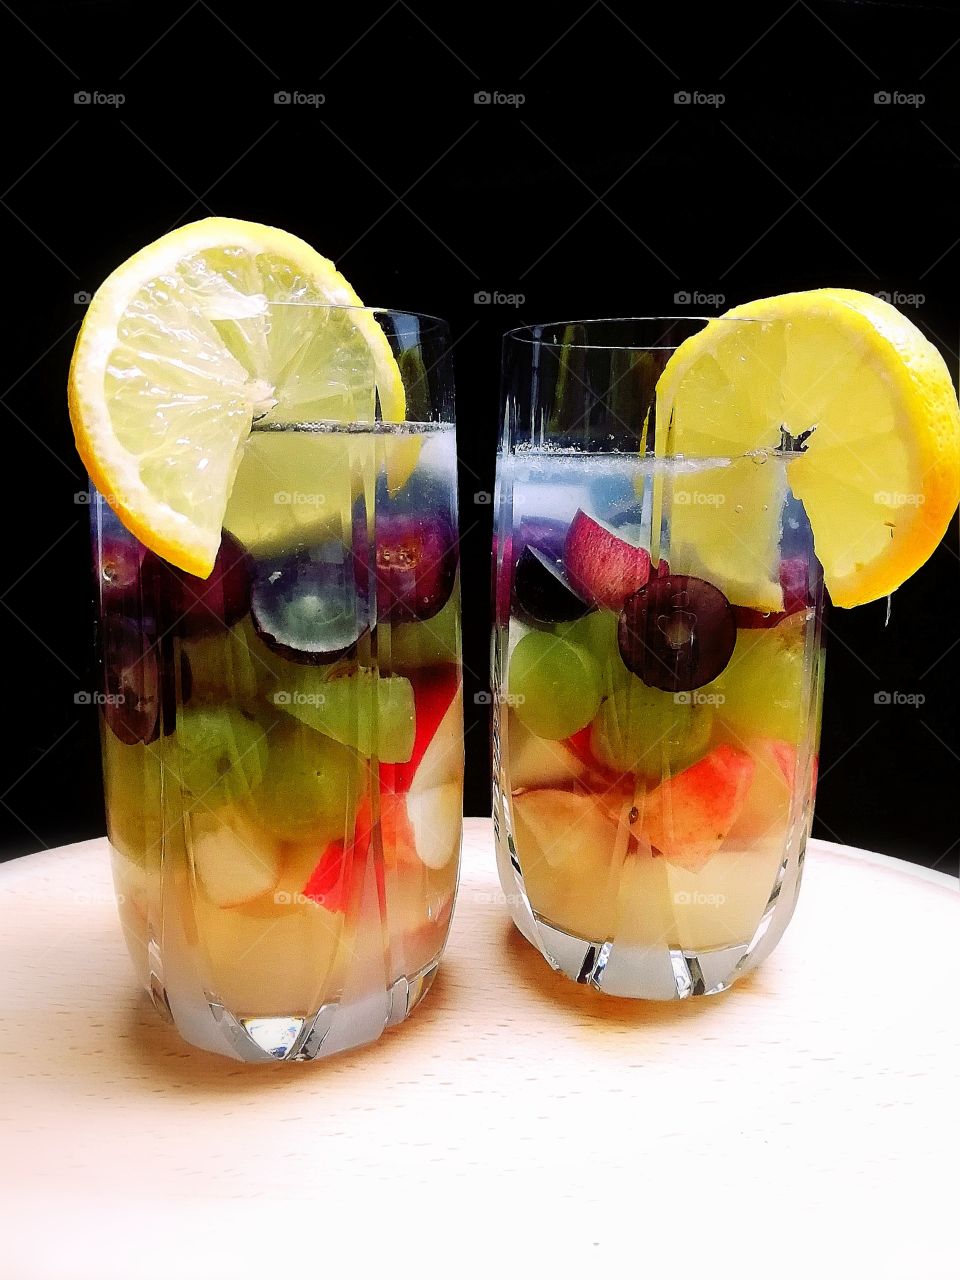 Non-alcoholic refreshment in tropical day with lemon, lime, grapes, apples and ice in one glass.